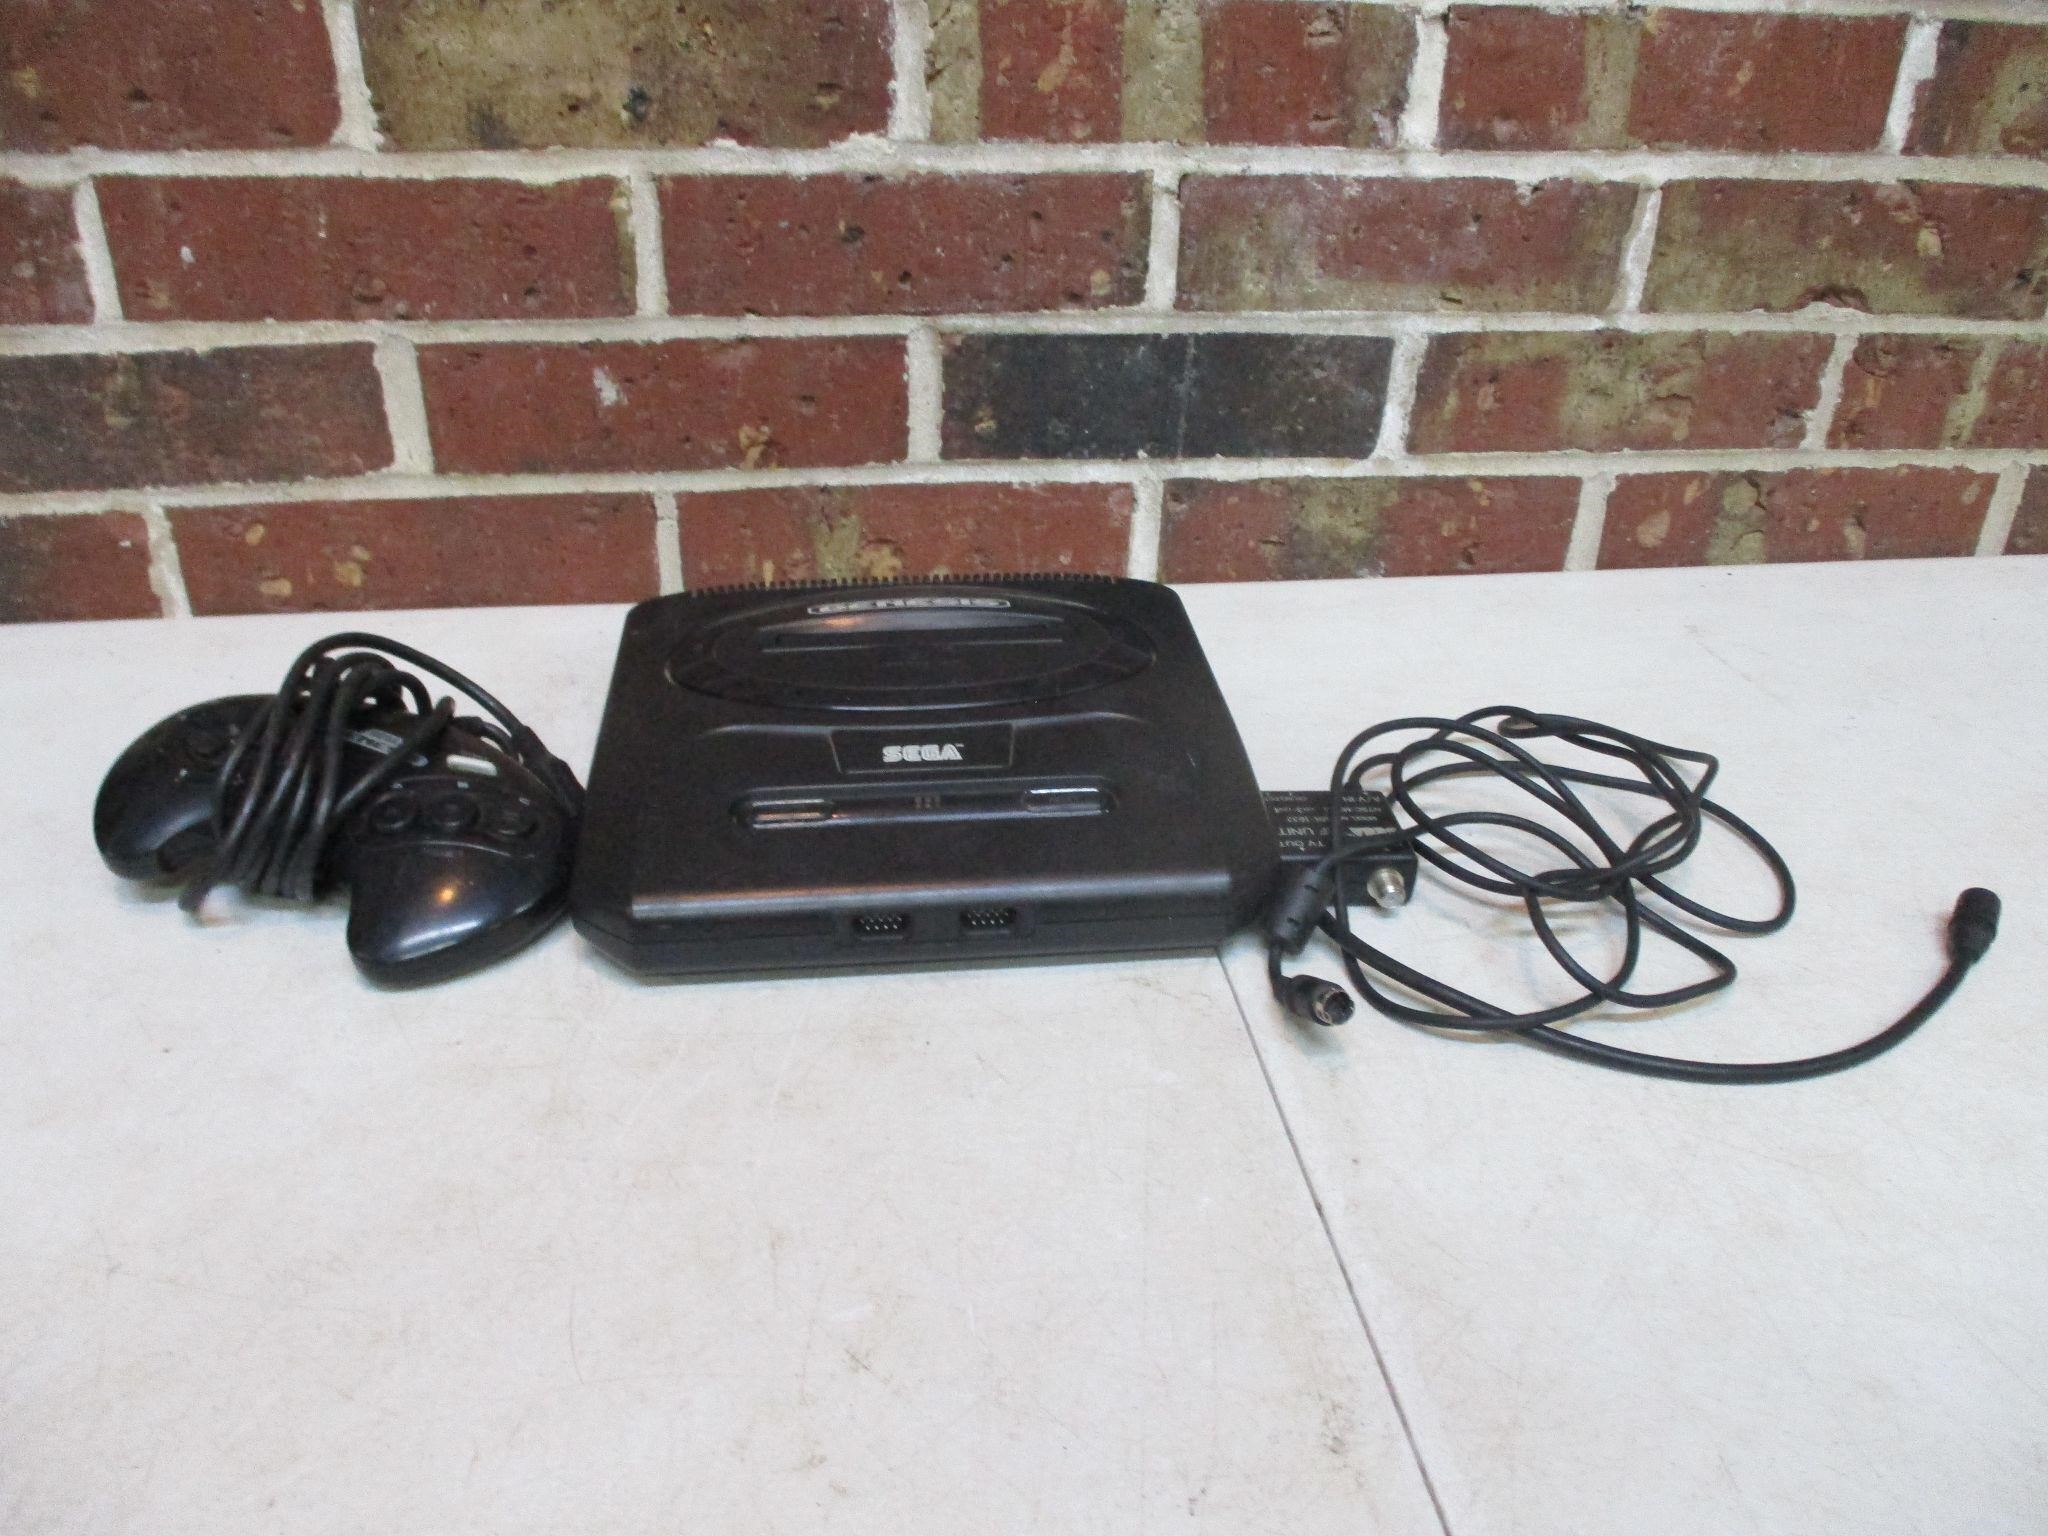 Genesis Game Console with Controller